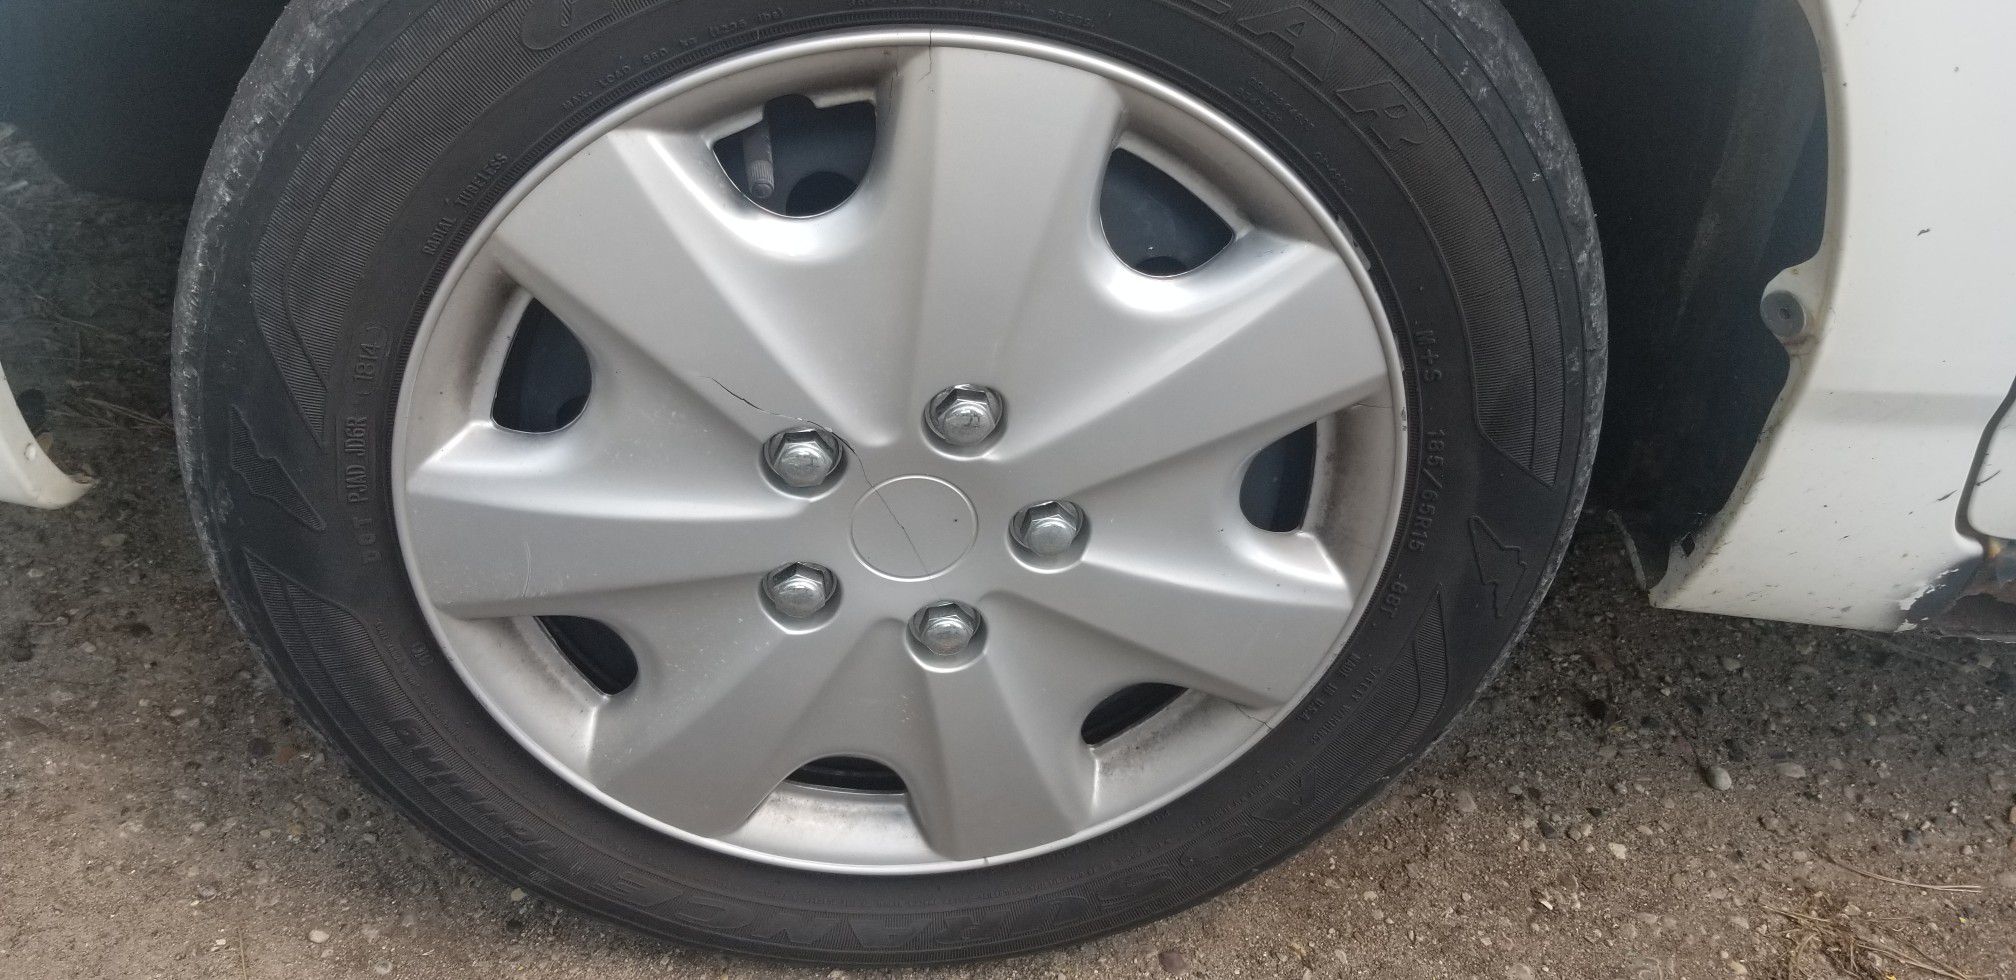 2004 Toyota Corolla rims and tires(all set)